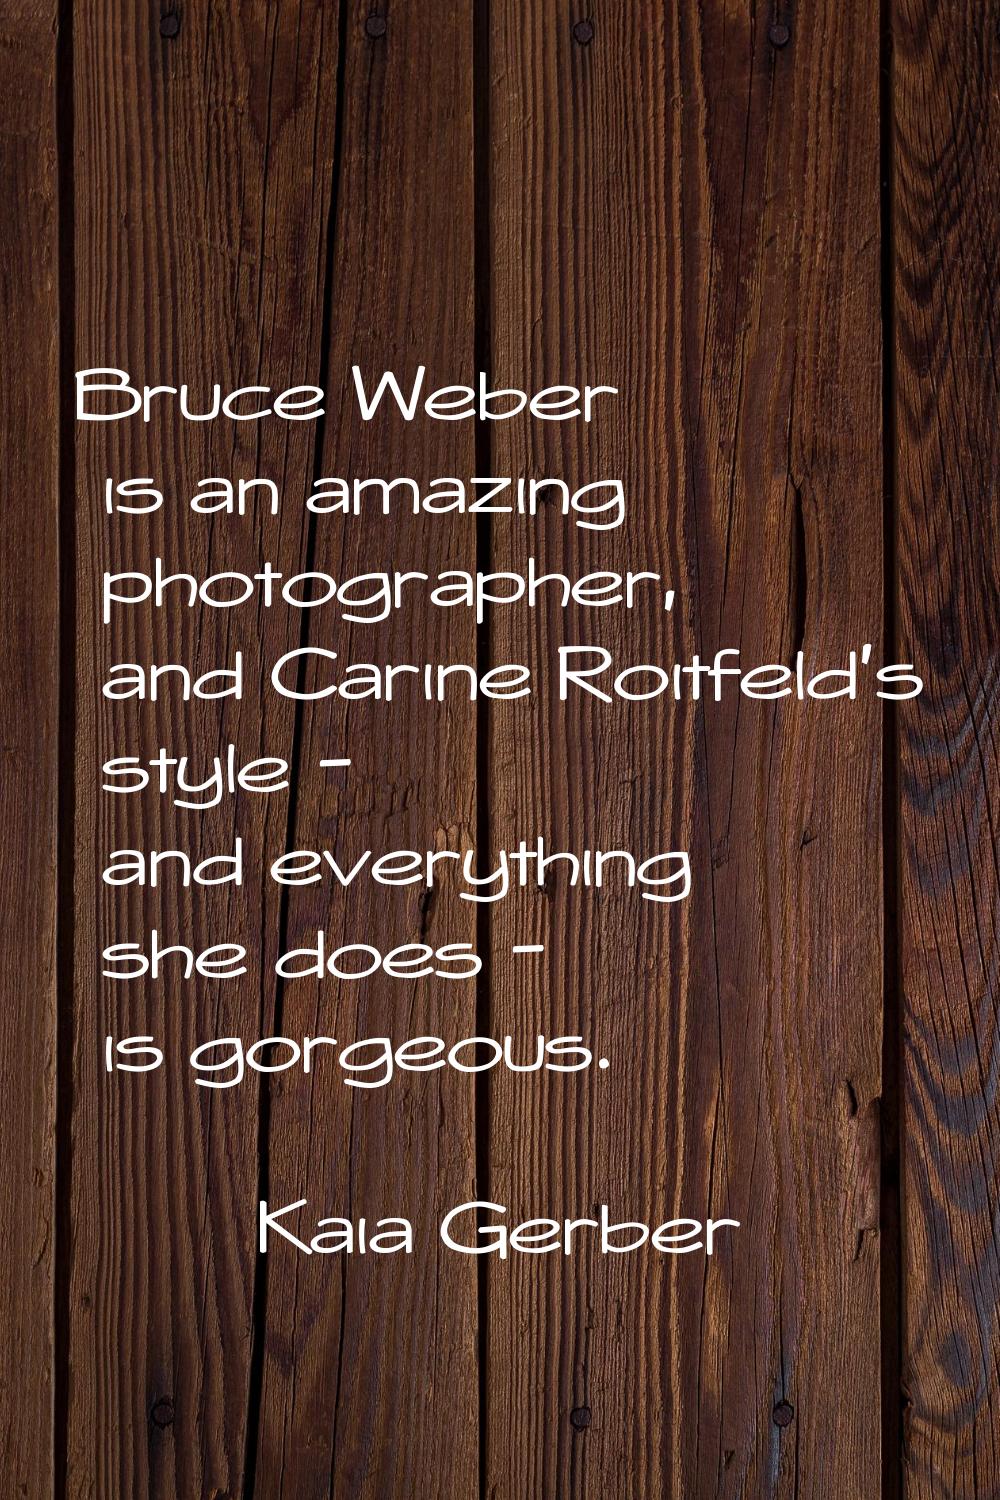 Bruce Weber is an amazing photographer, and Carine Roitfeld's style - and everything she does - is 